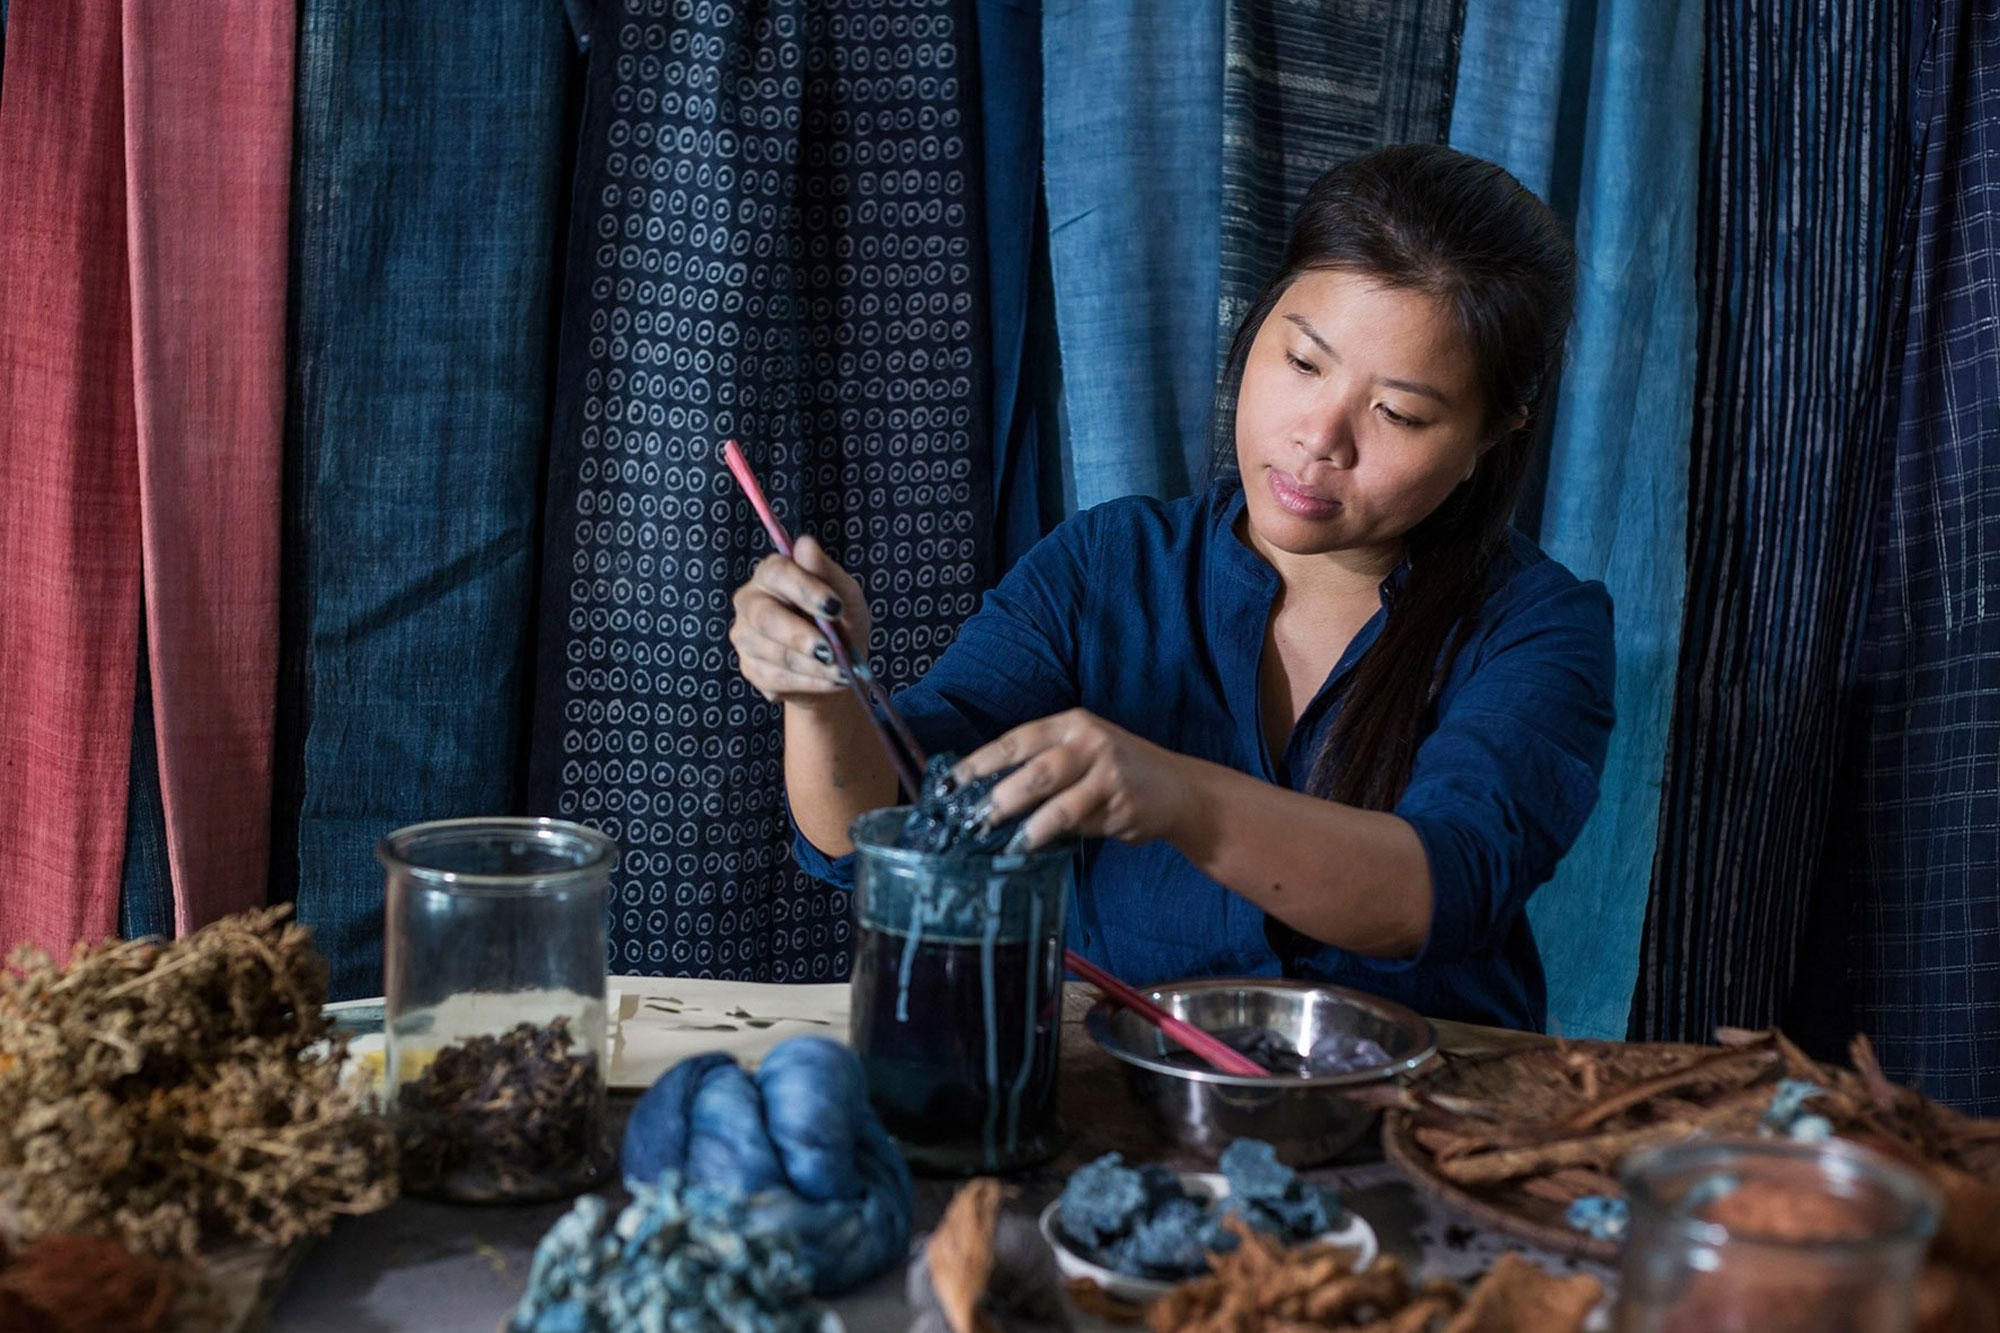 A person with brown skin, dark eyes and long dark hair sitting in front of a blue and red curtain and using a paintbrush to dip into a cylindrical beaker filled with blue liquid. There is another  beaker ion the table and some natural objects. Ther person is wearing a blue shirt.